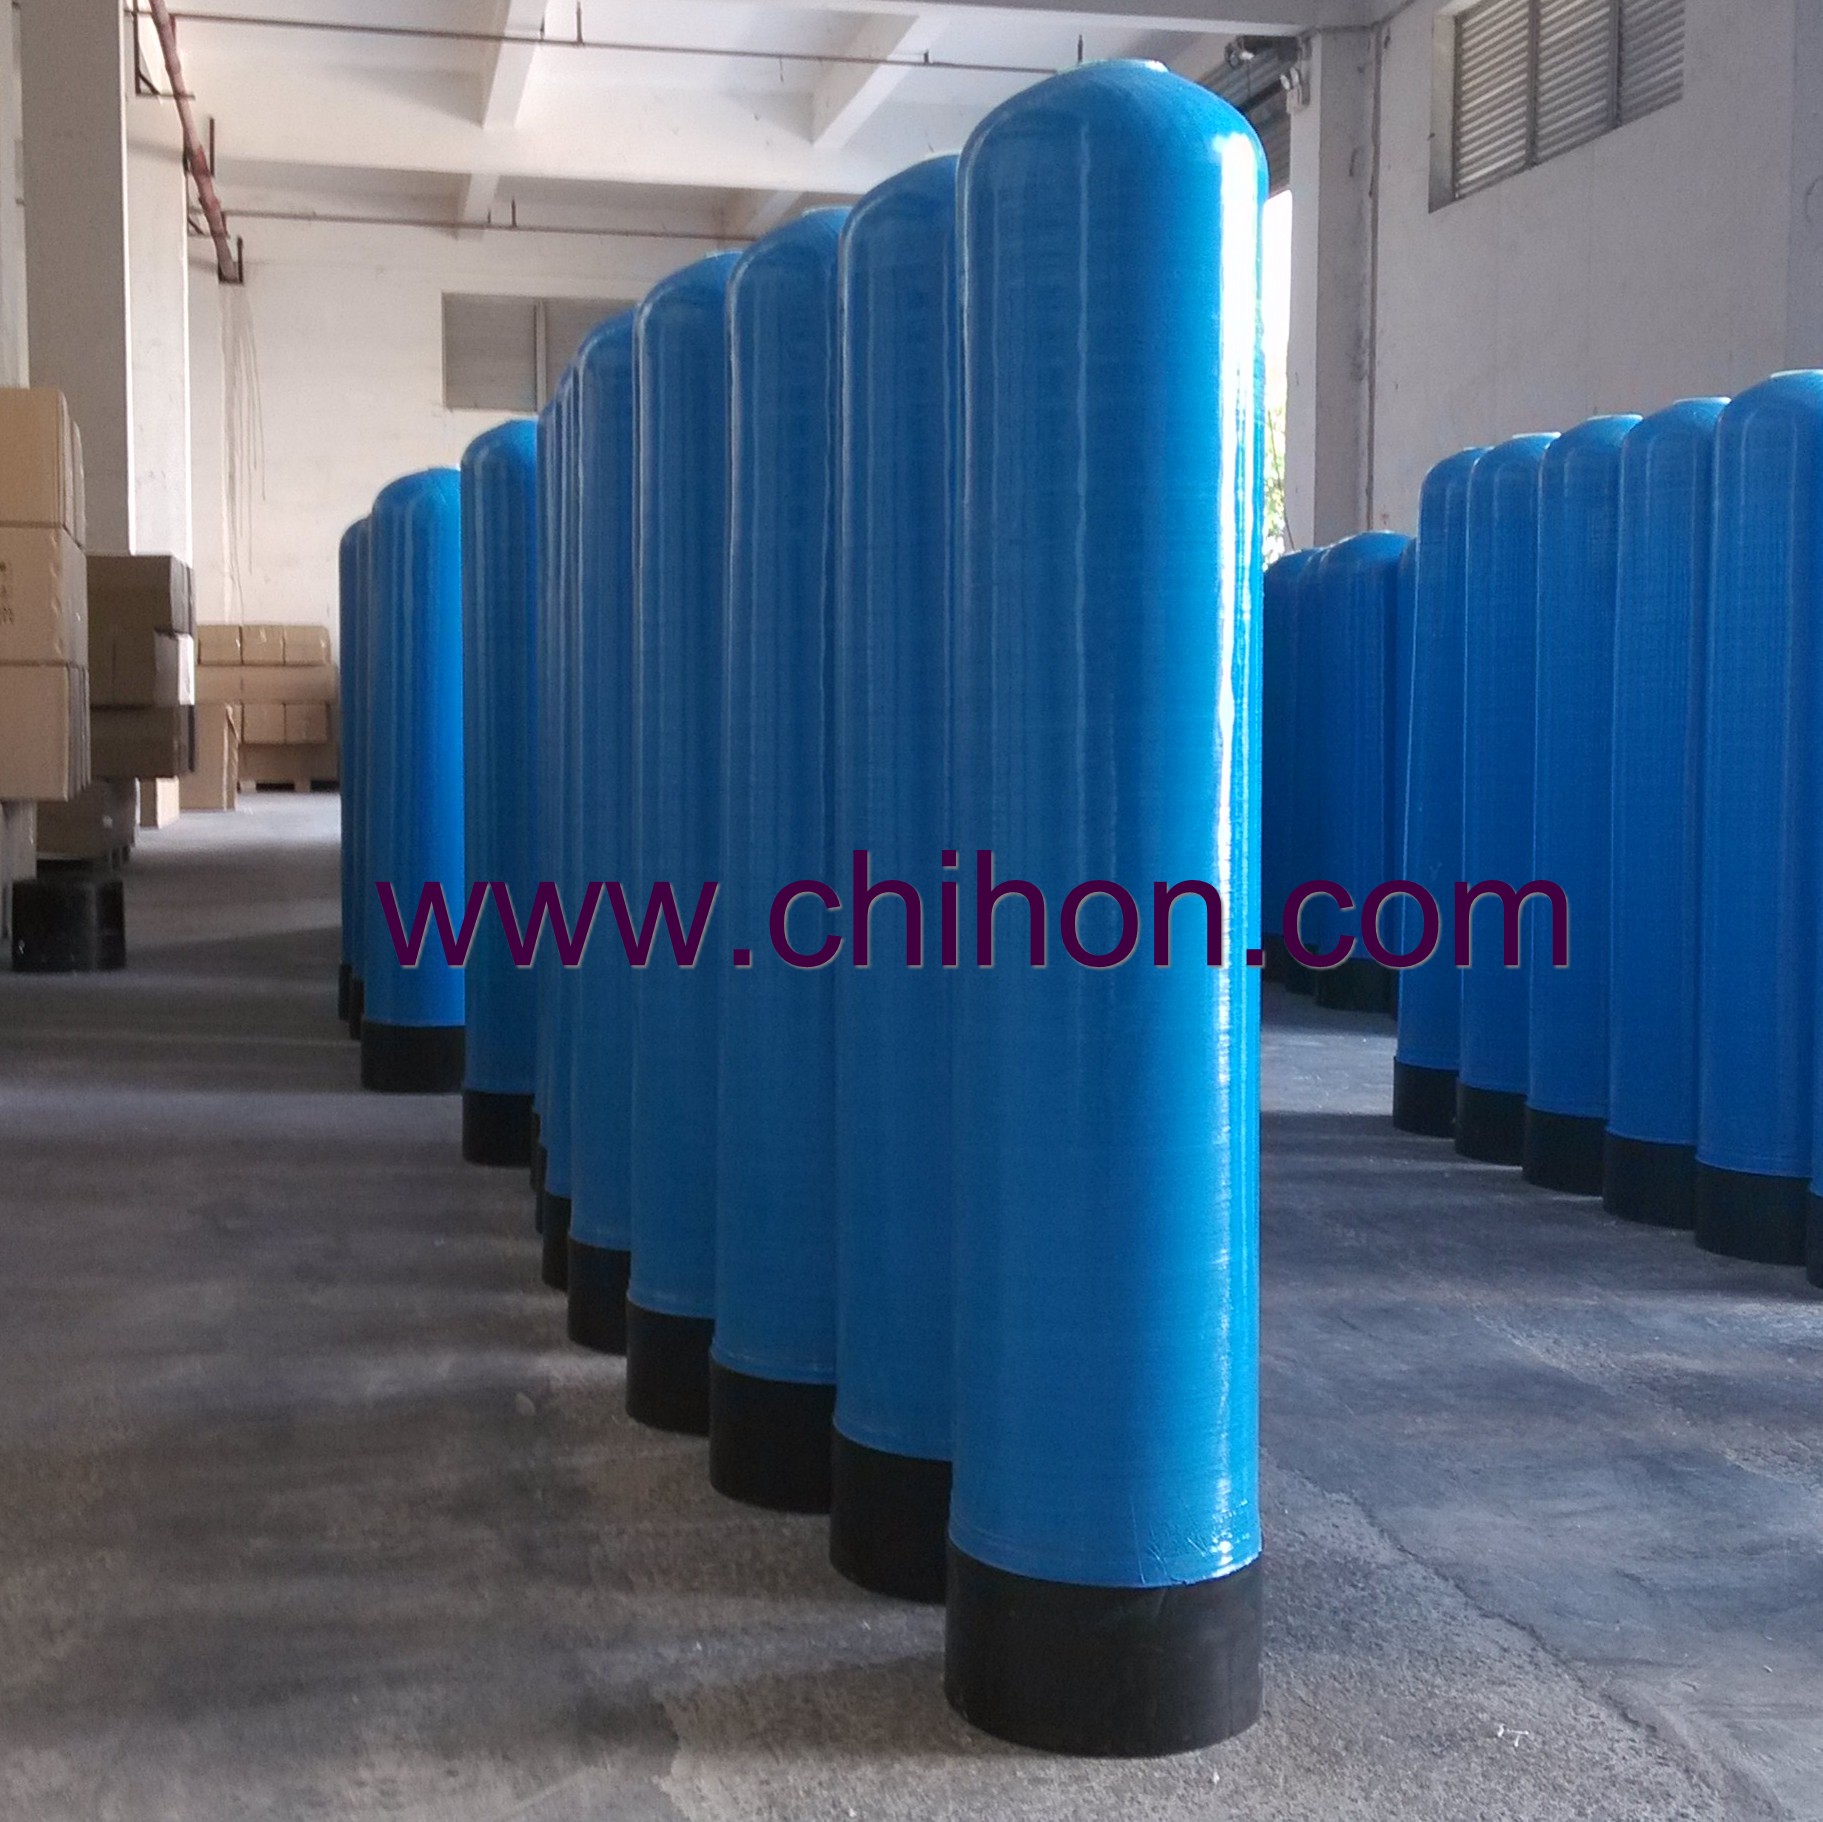 1035 FRP Tank for water softener treatment with carbon filter